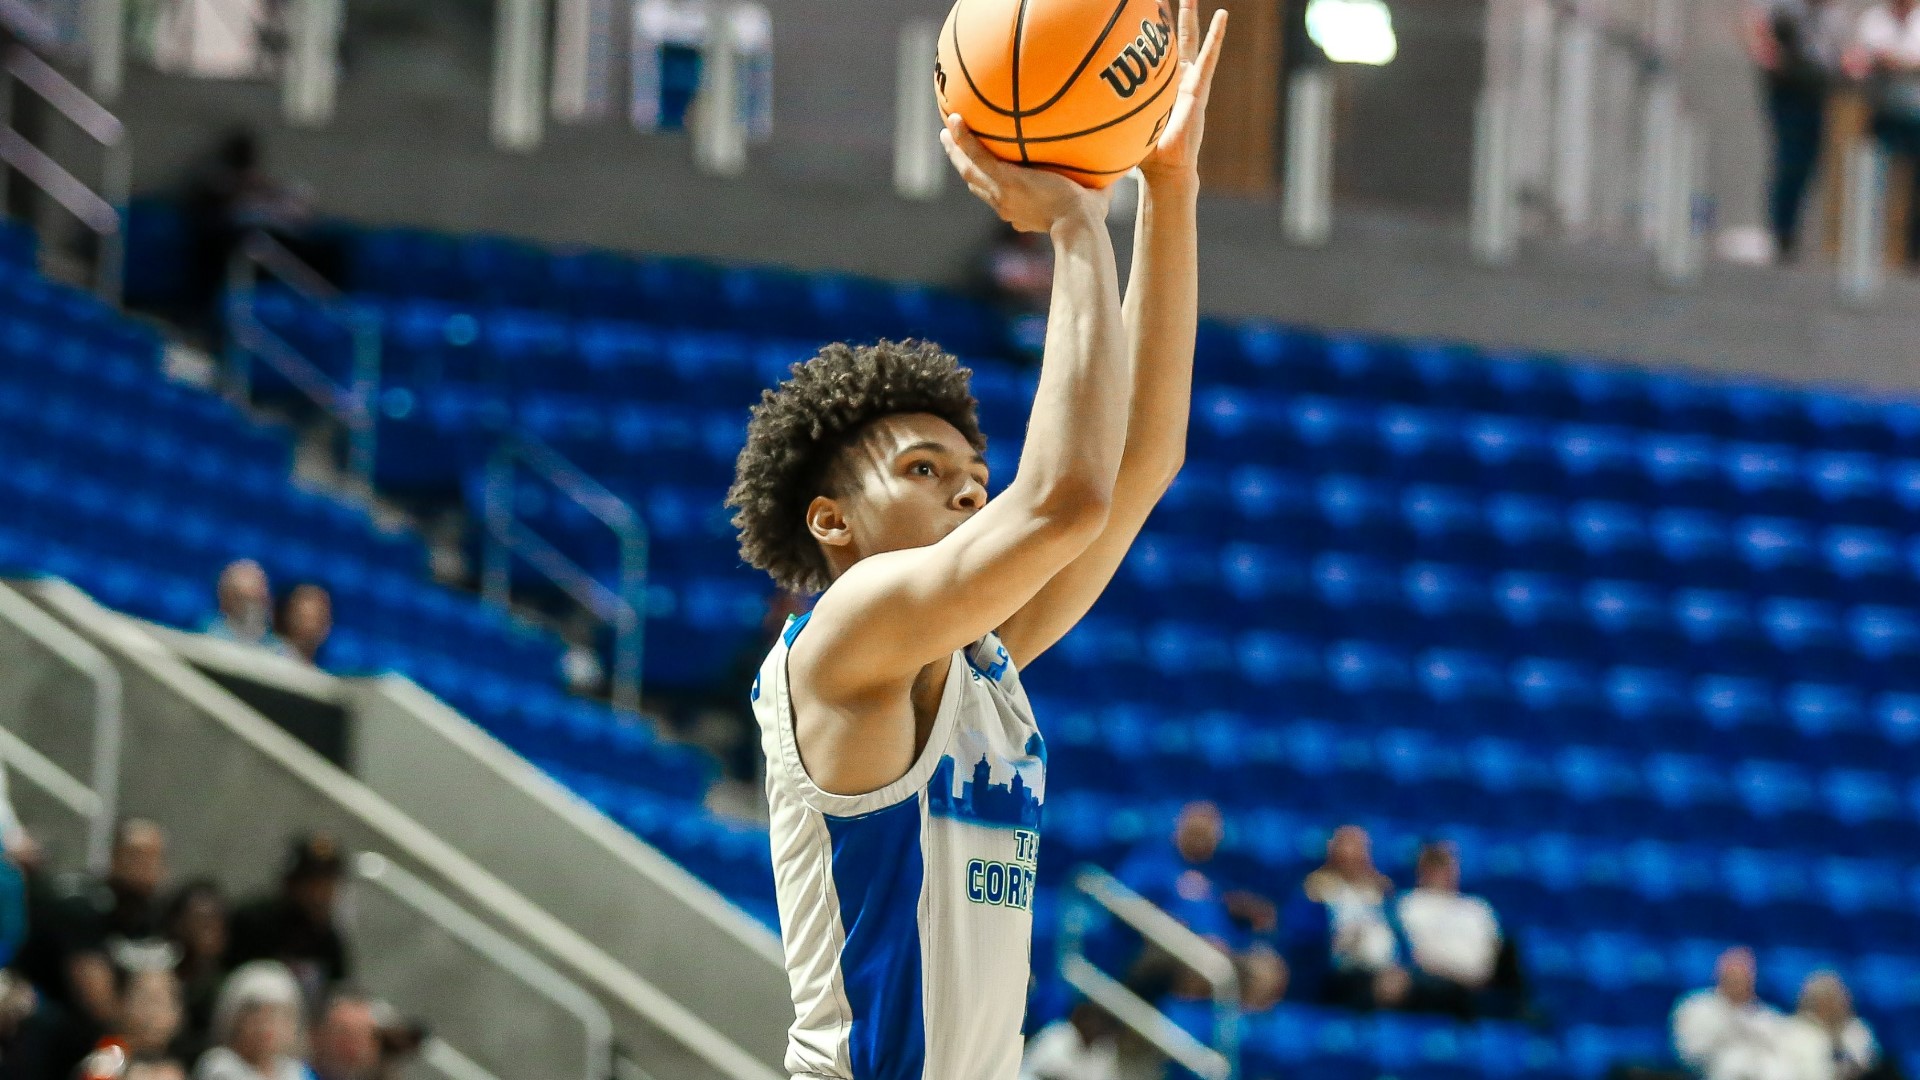 Texas A&M-Corpus Christi had three players foul out in an overtime loss to the Colonels.